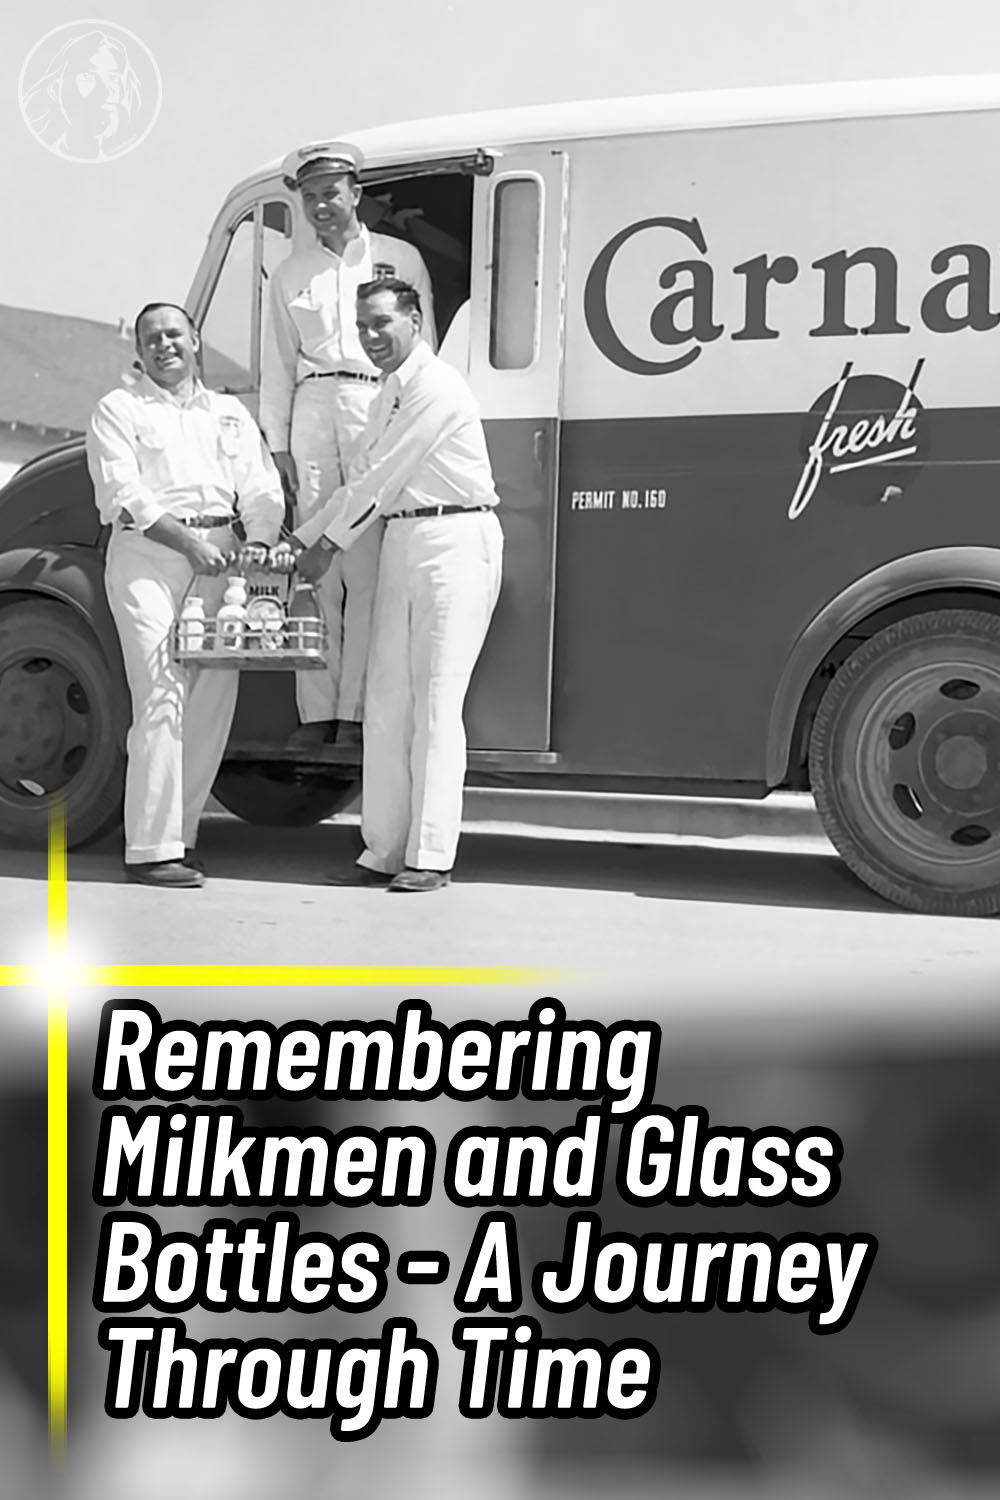 Remembering Milkmen and Glass Bottles - A Journey Through Time